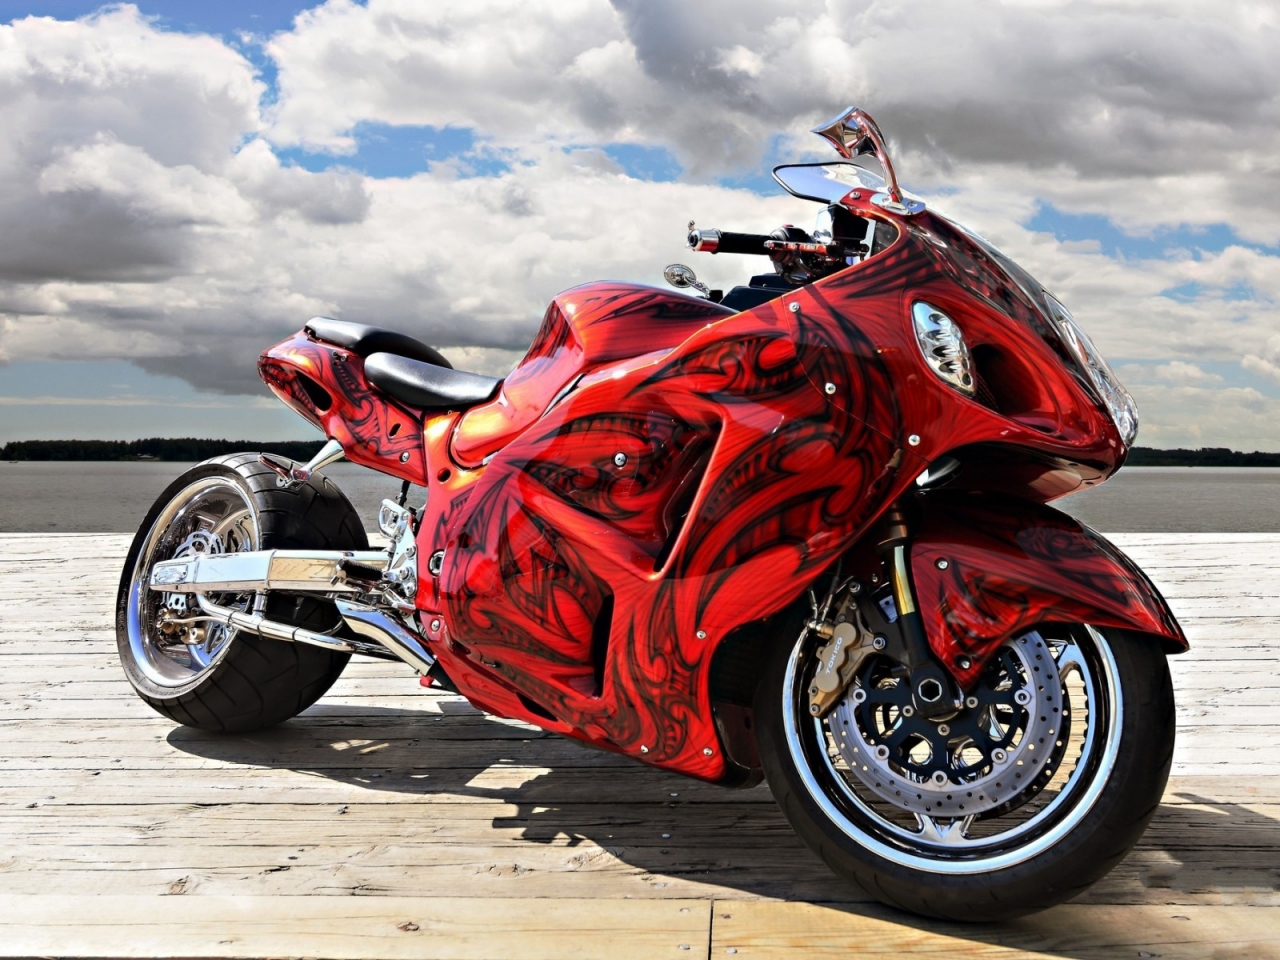 Gorgeous Red Motorcycle for 1280 x 960 resolution